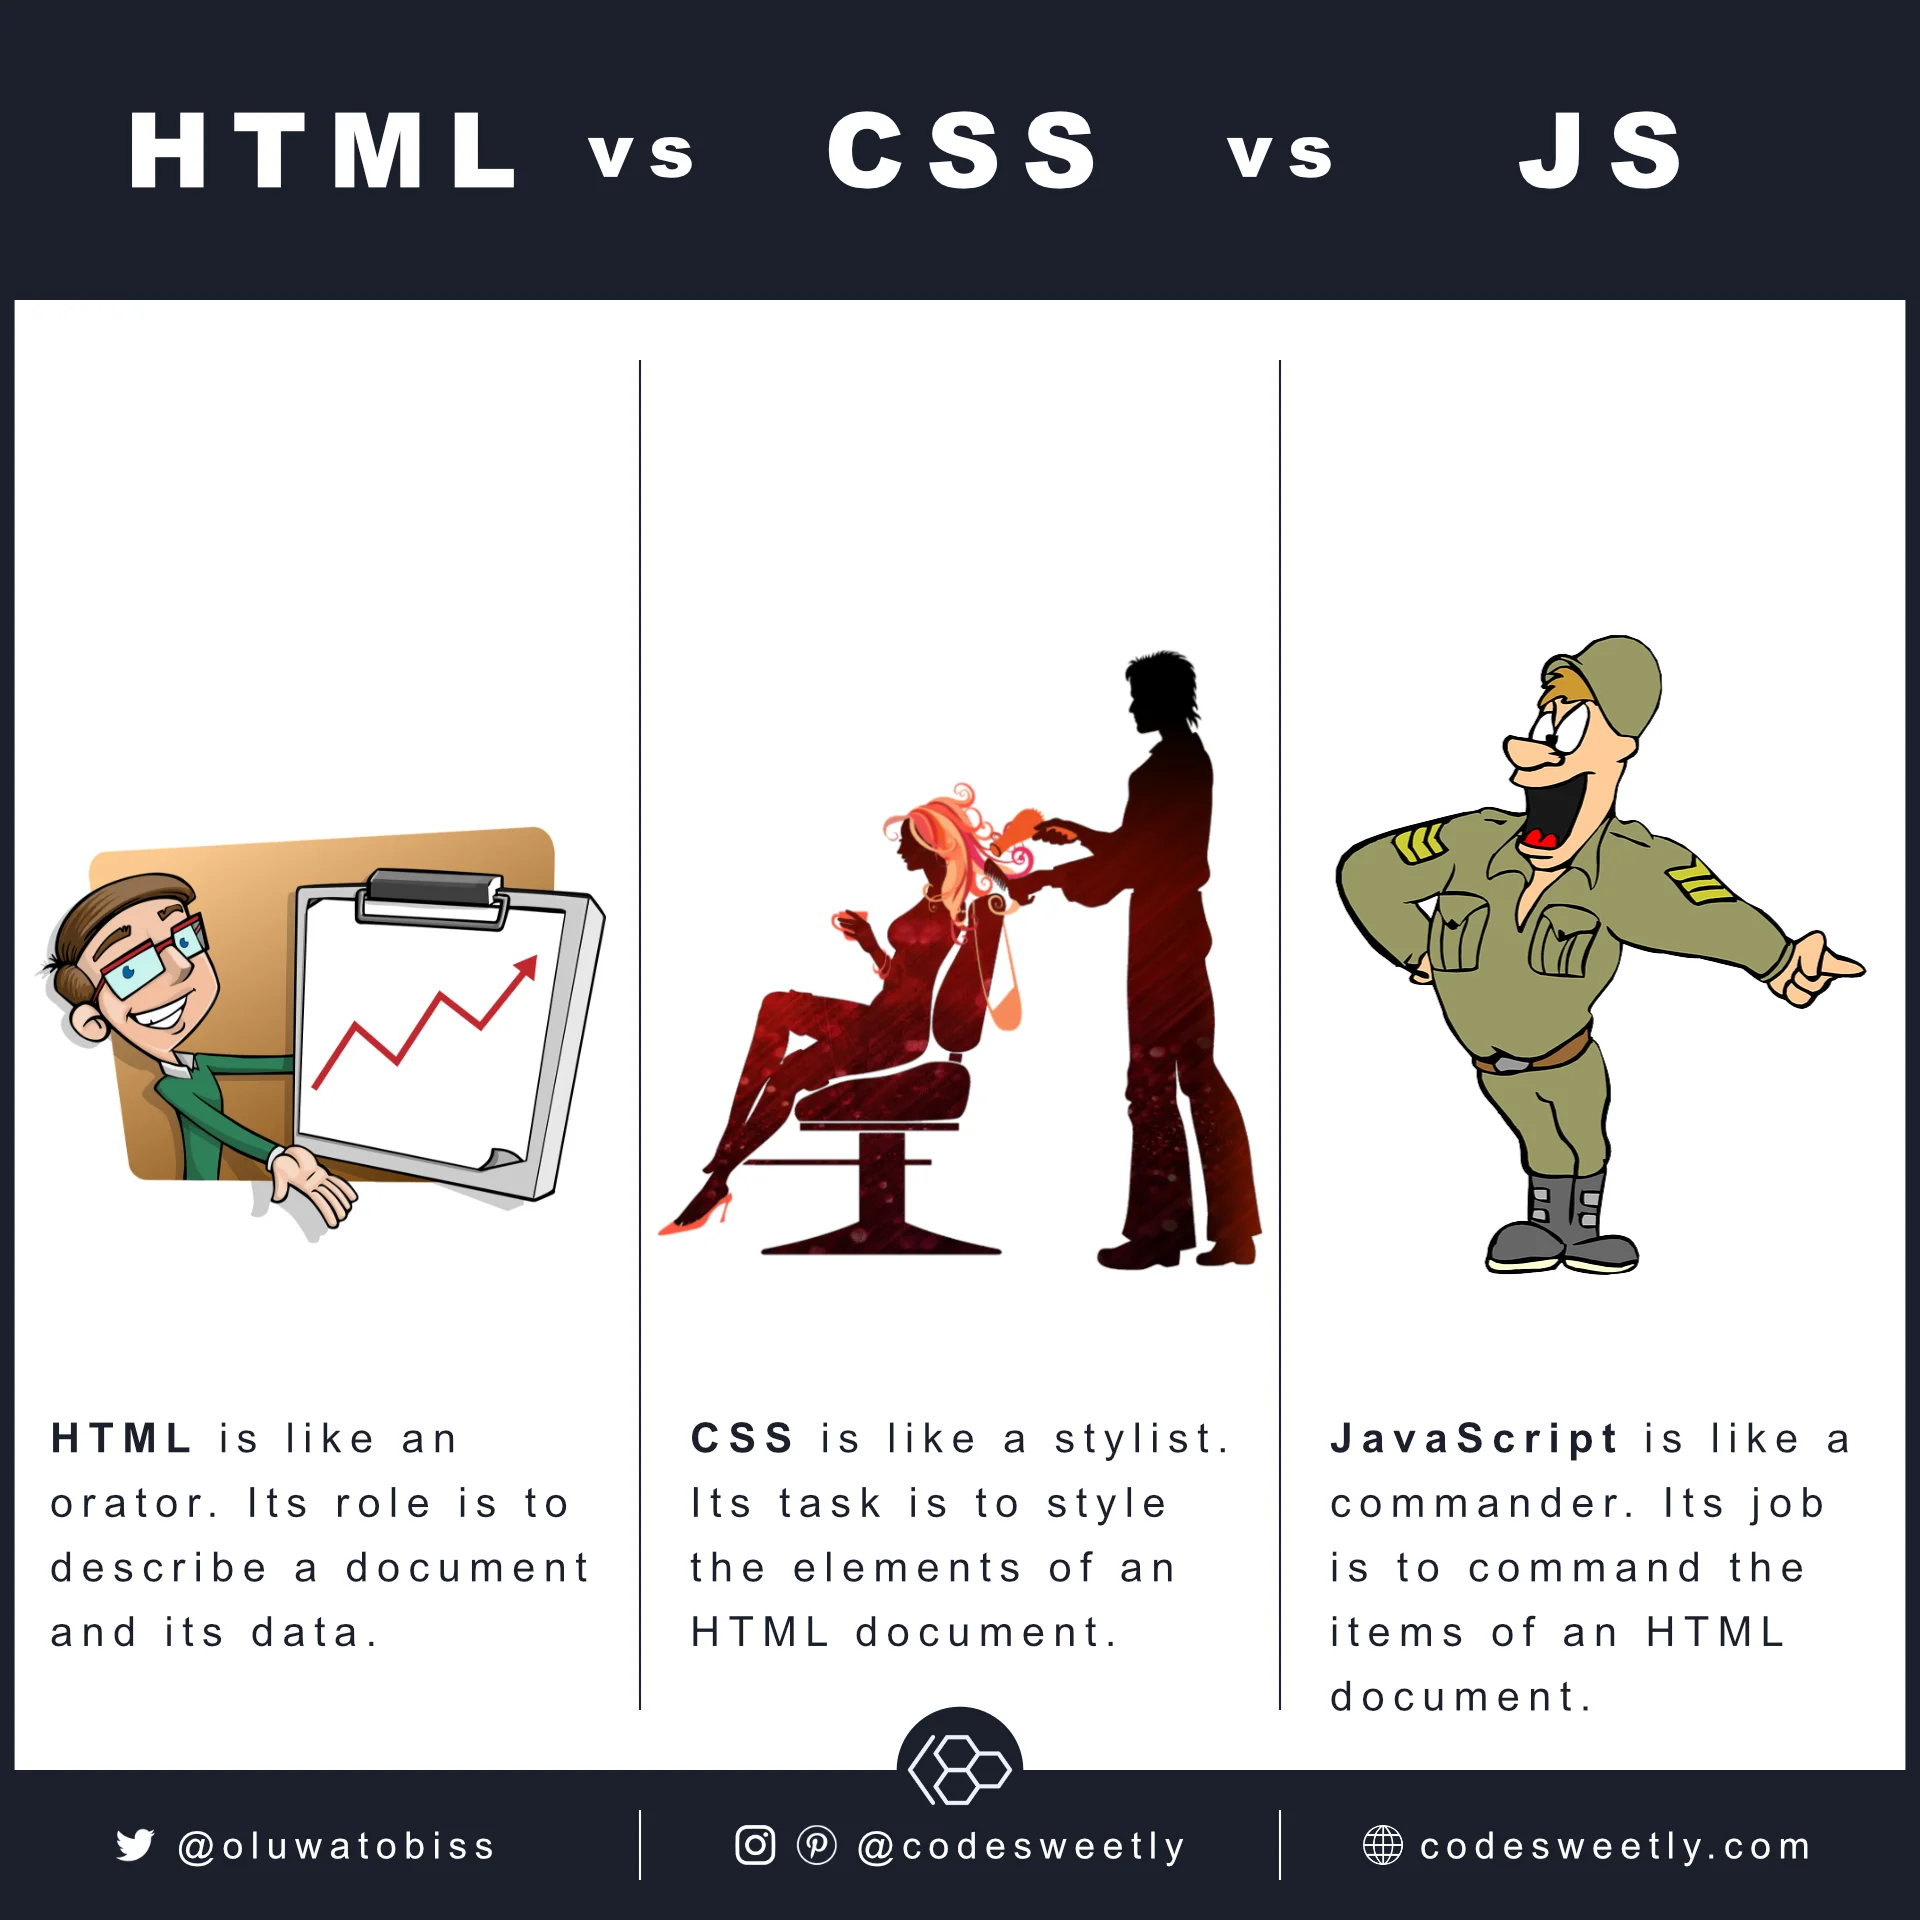 HTML describes data. CSS styles elements. JavaScript commands items.